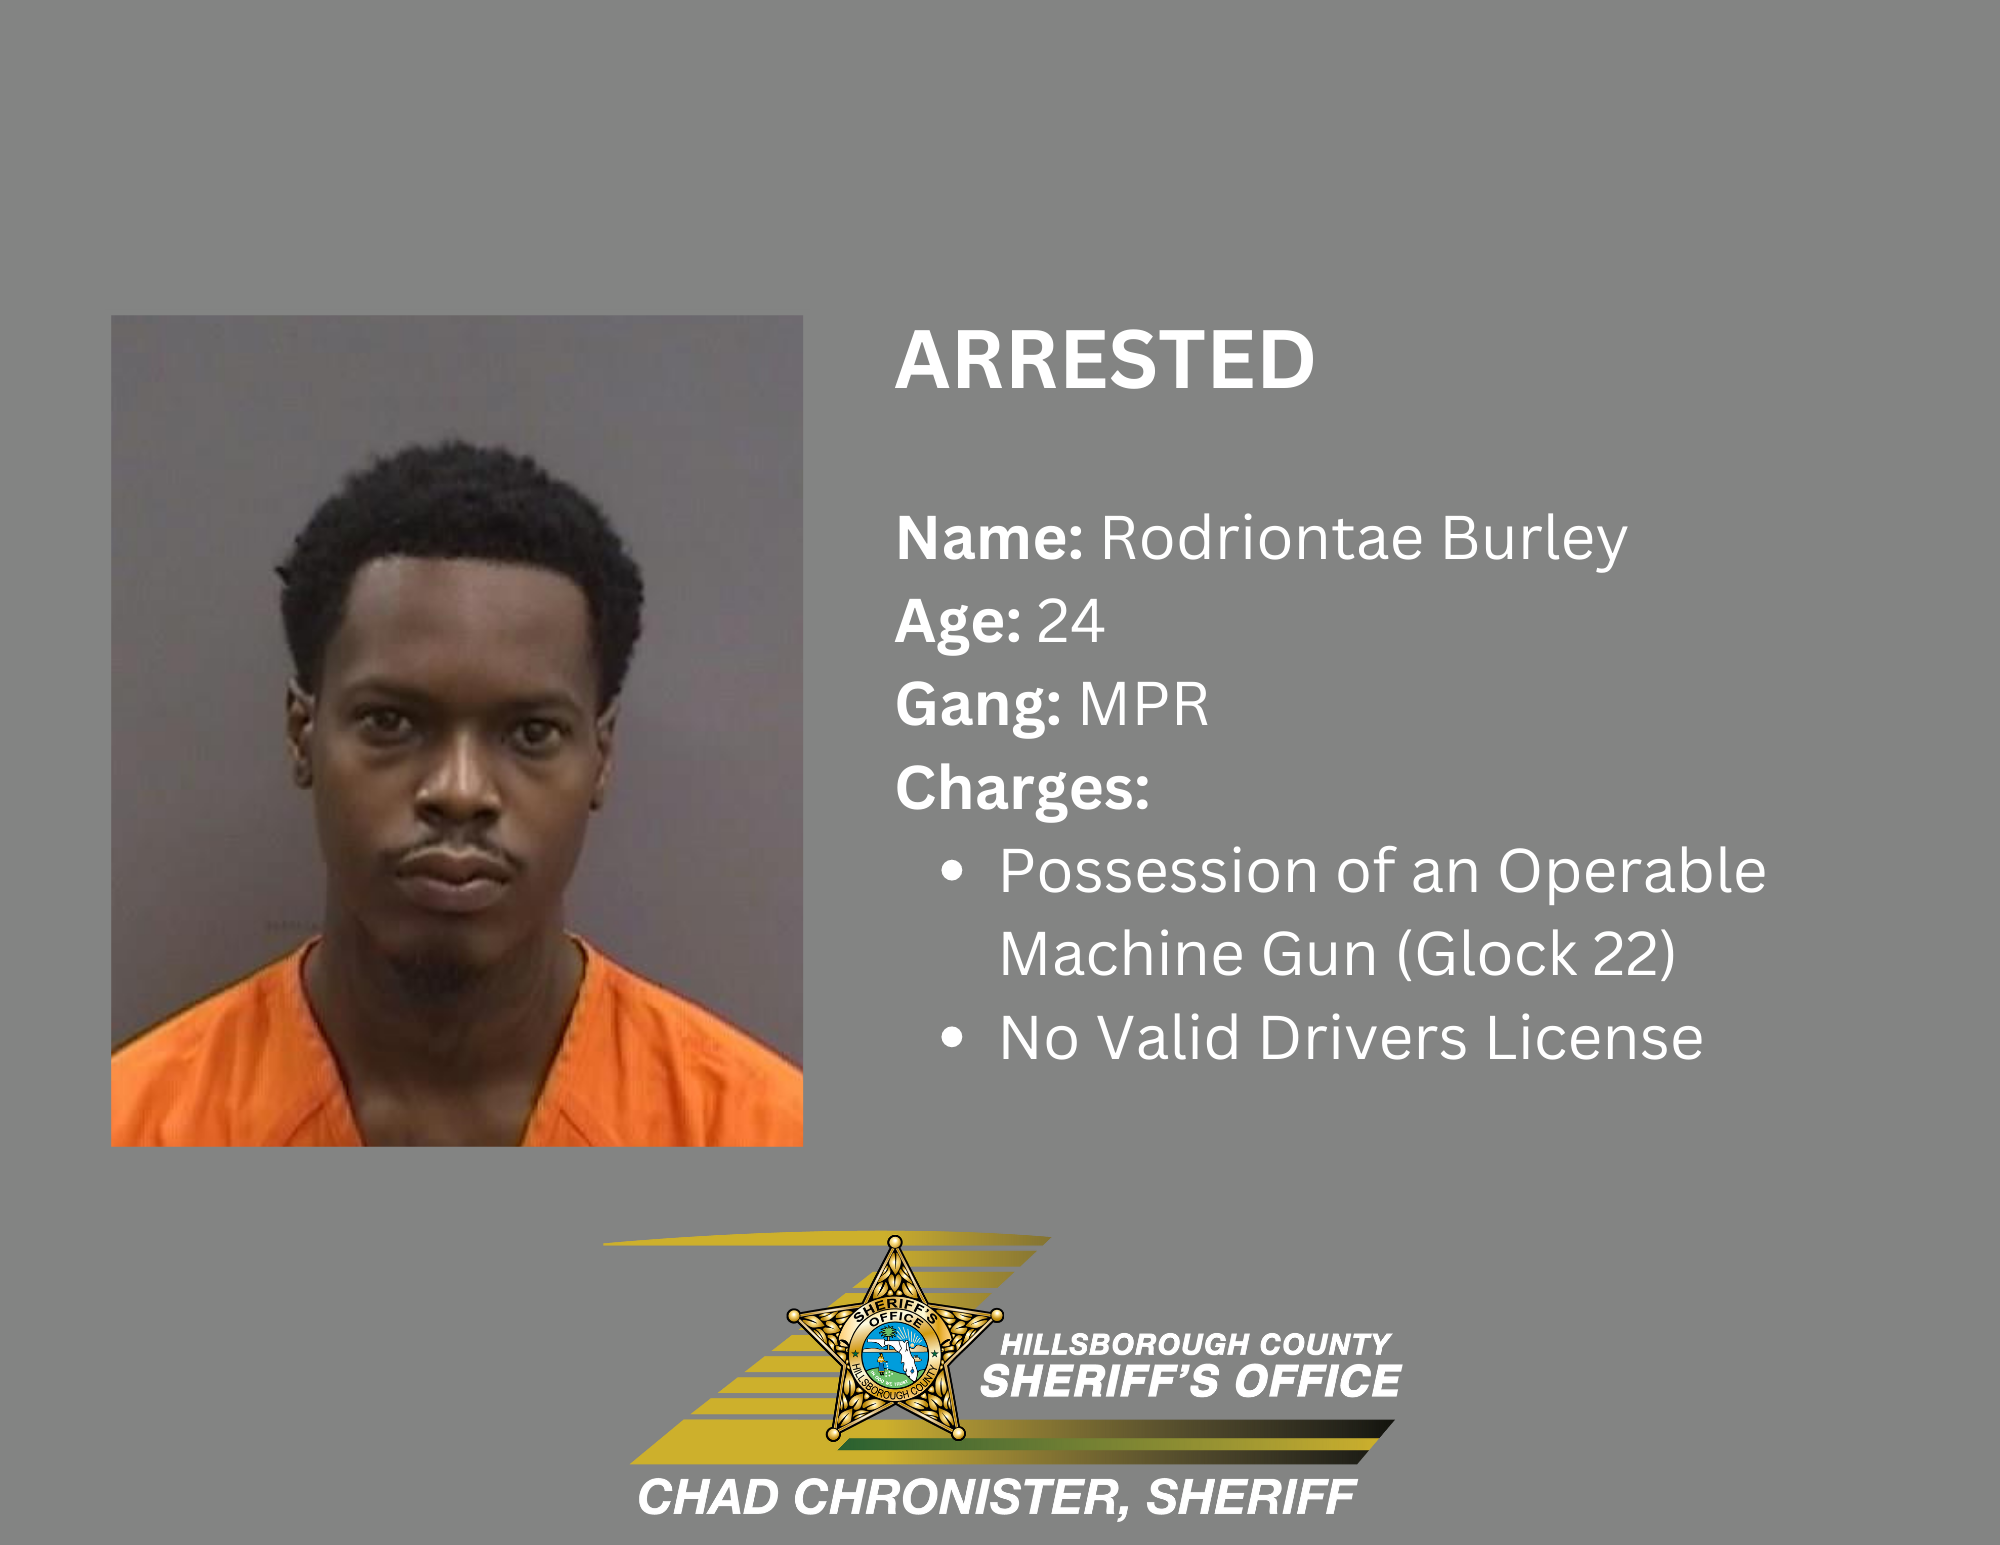 GANG MEMBERS ARRESTED IN POSSESSION OF DRUGS AND "OPERABLE MACHINE GUN" Supporting Image